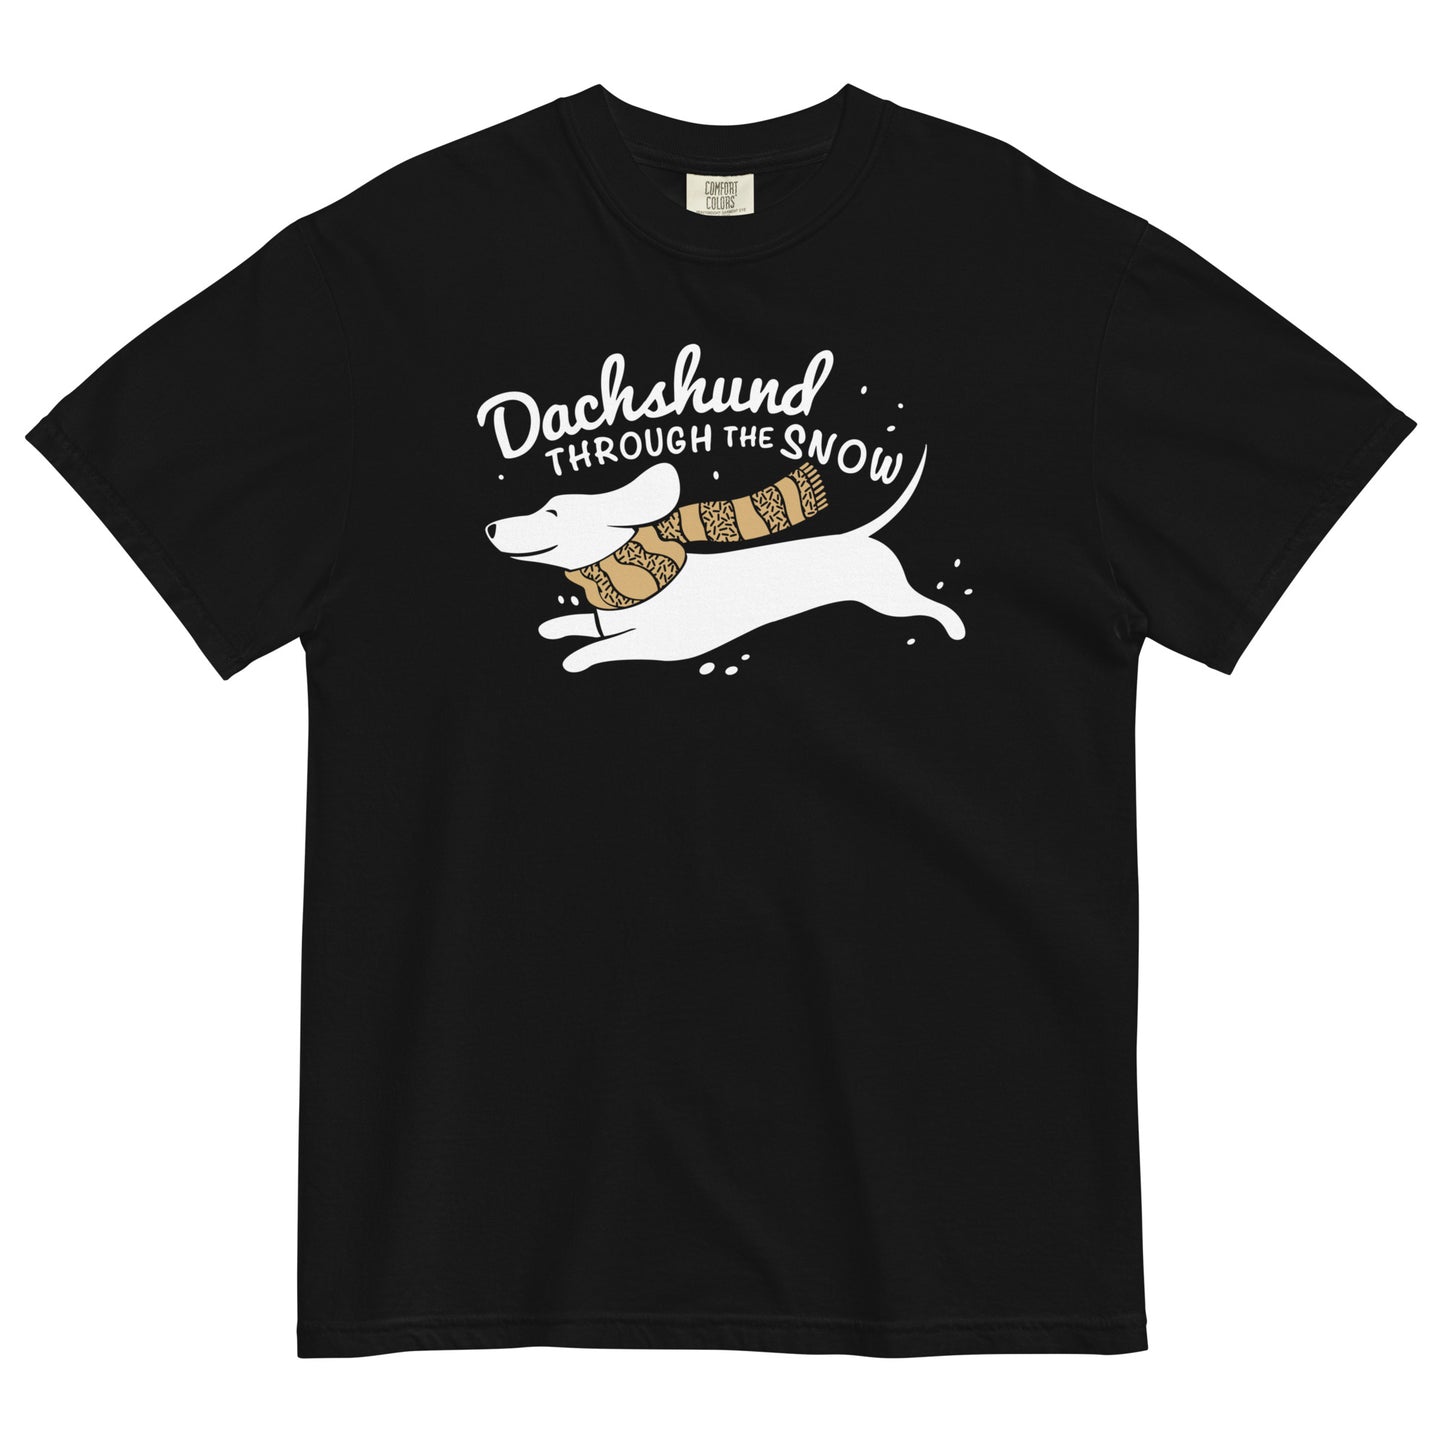 Dachshund Through The Snow Men's Relaxed Fit Tee